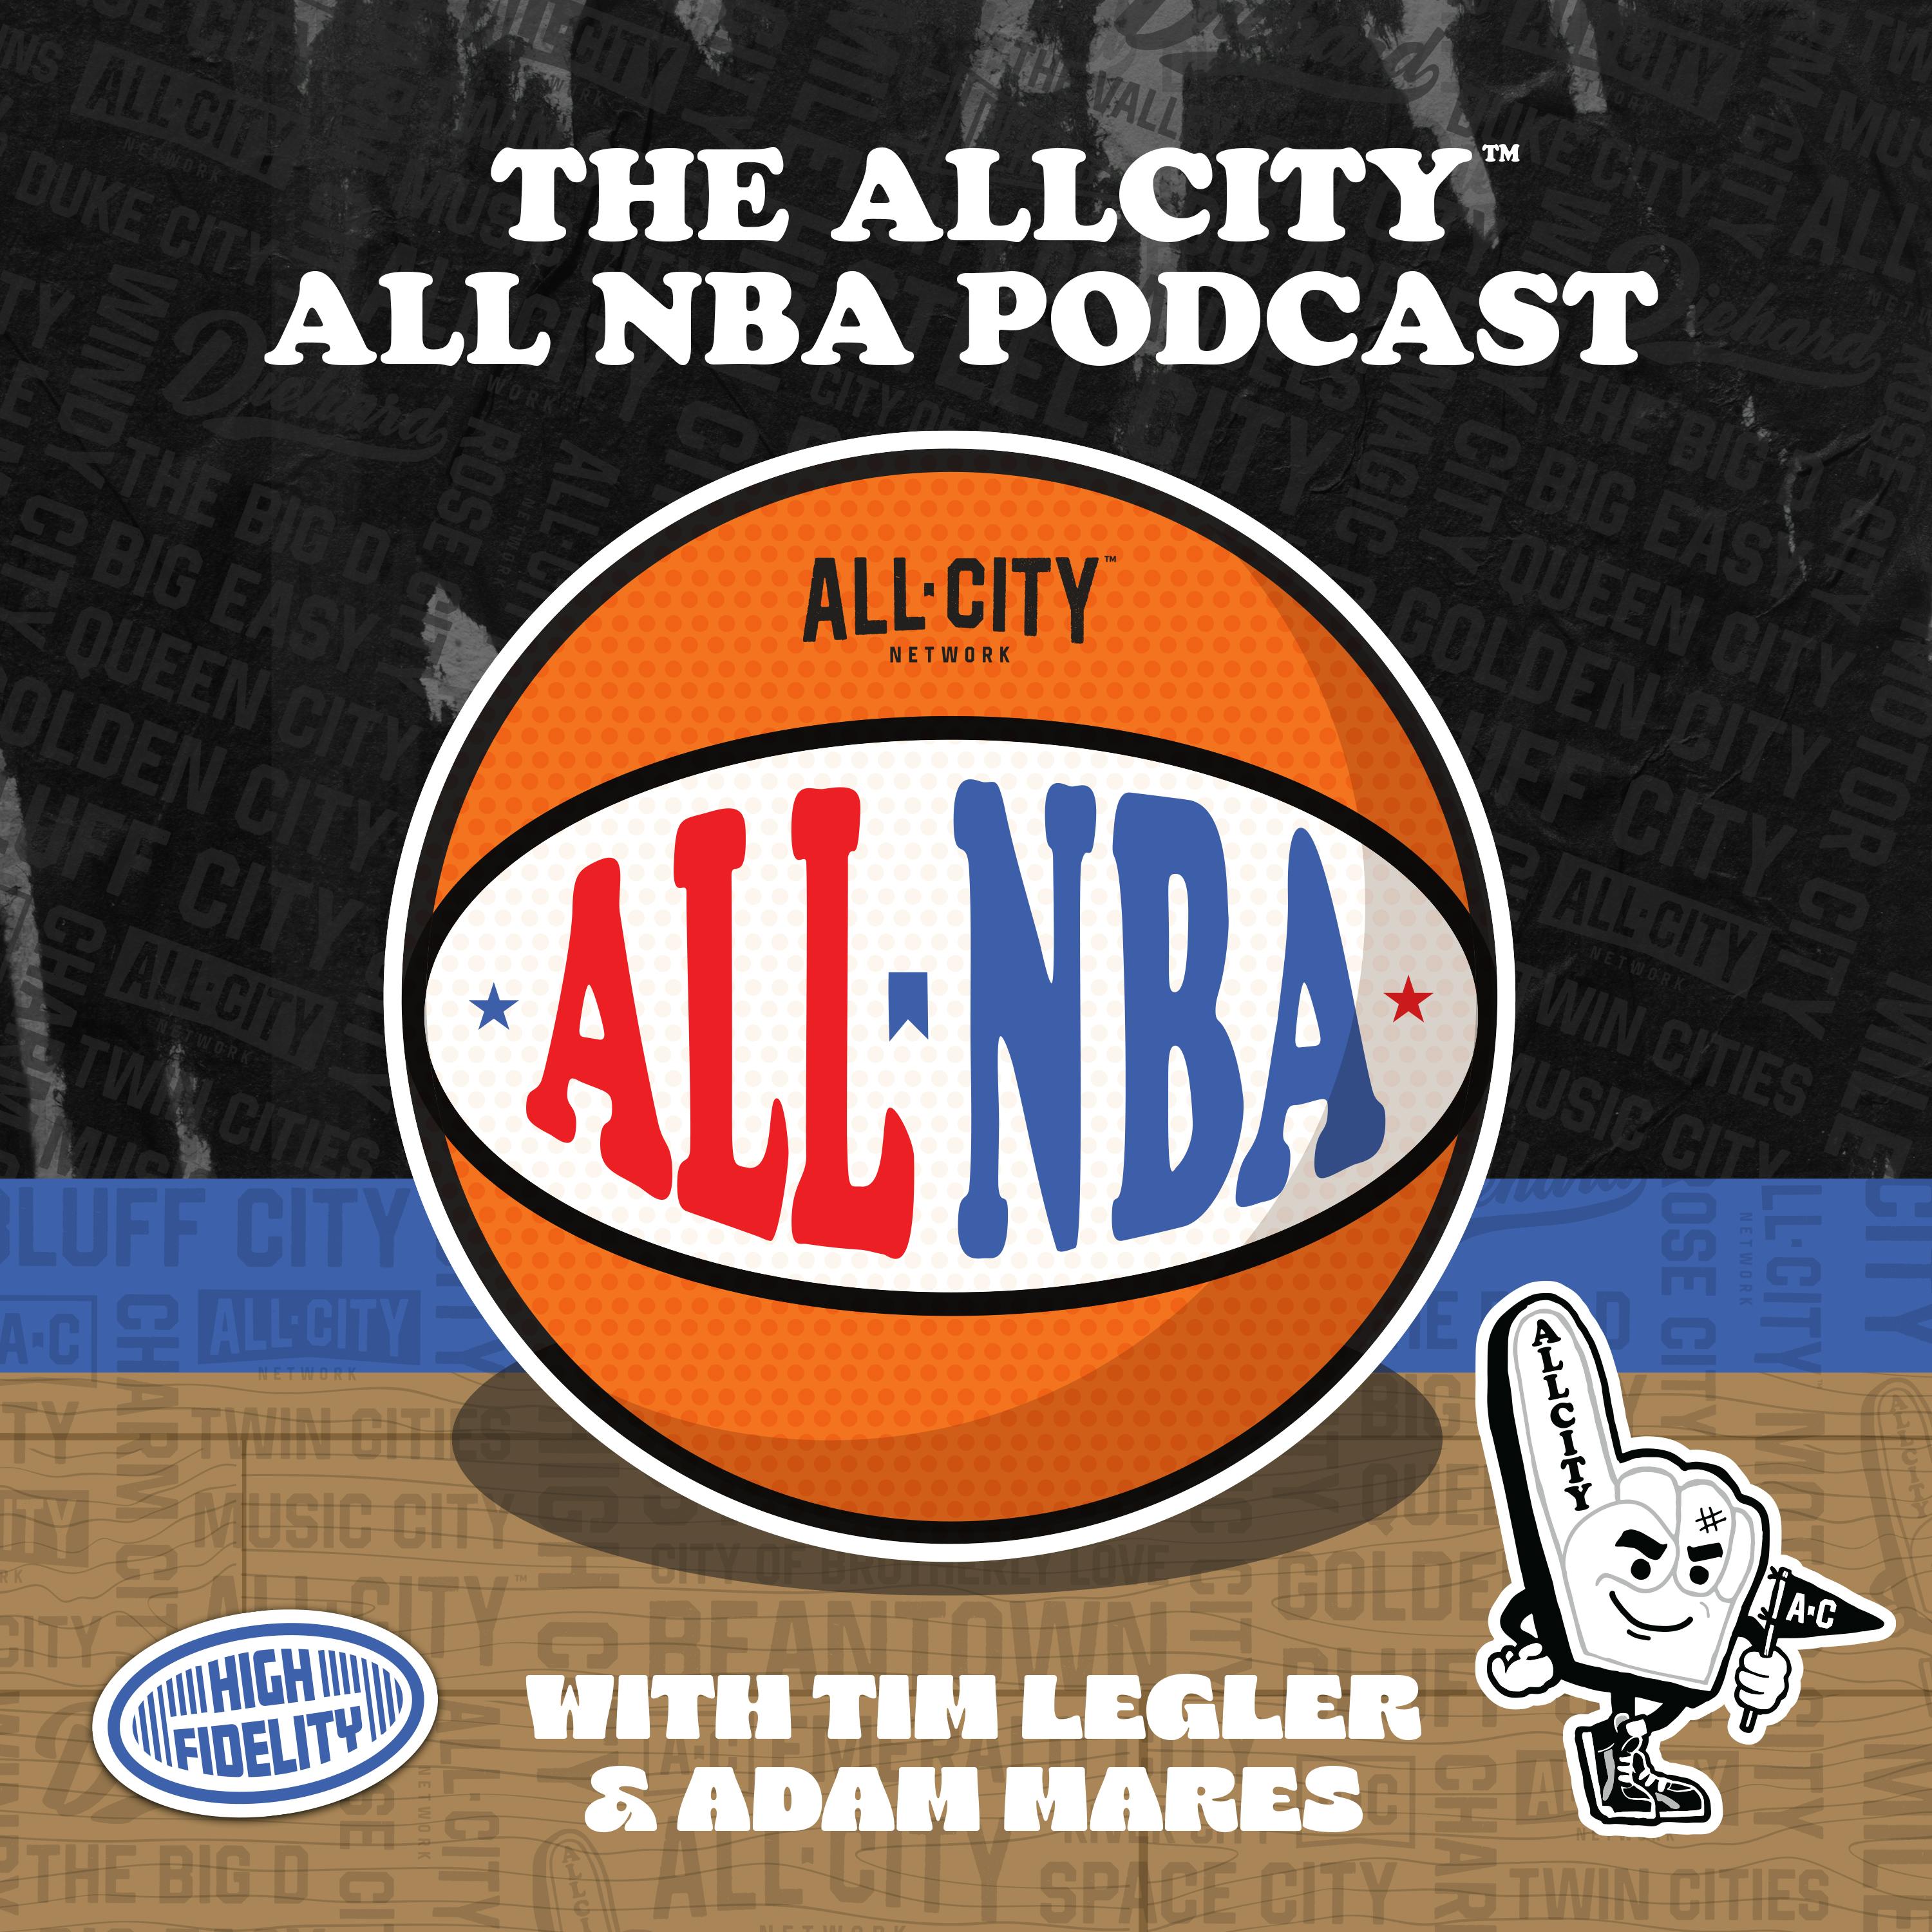 The ALL NBA Podcast: Portland Trail Blazers deep dive and picking All Star reserves